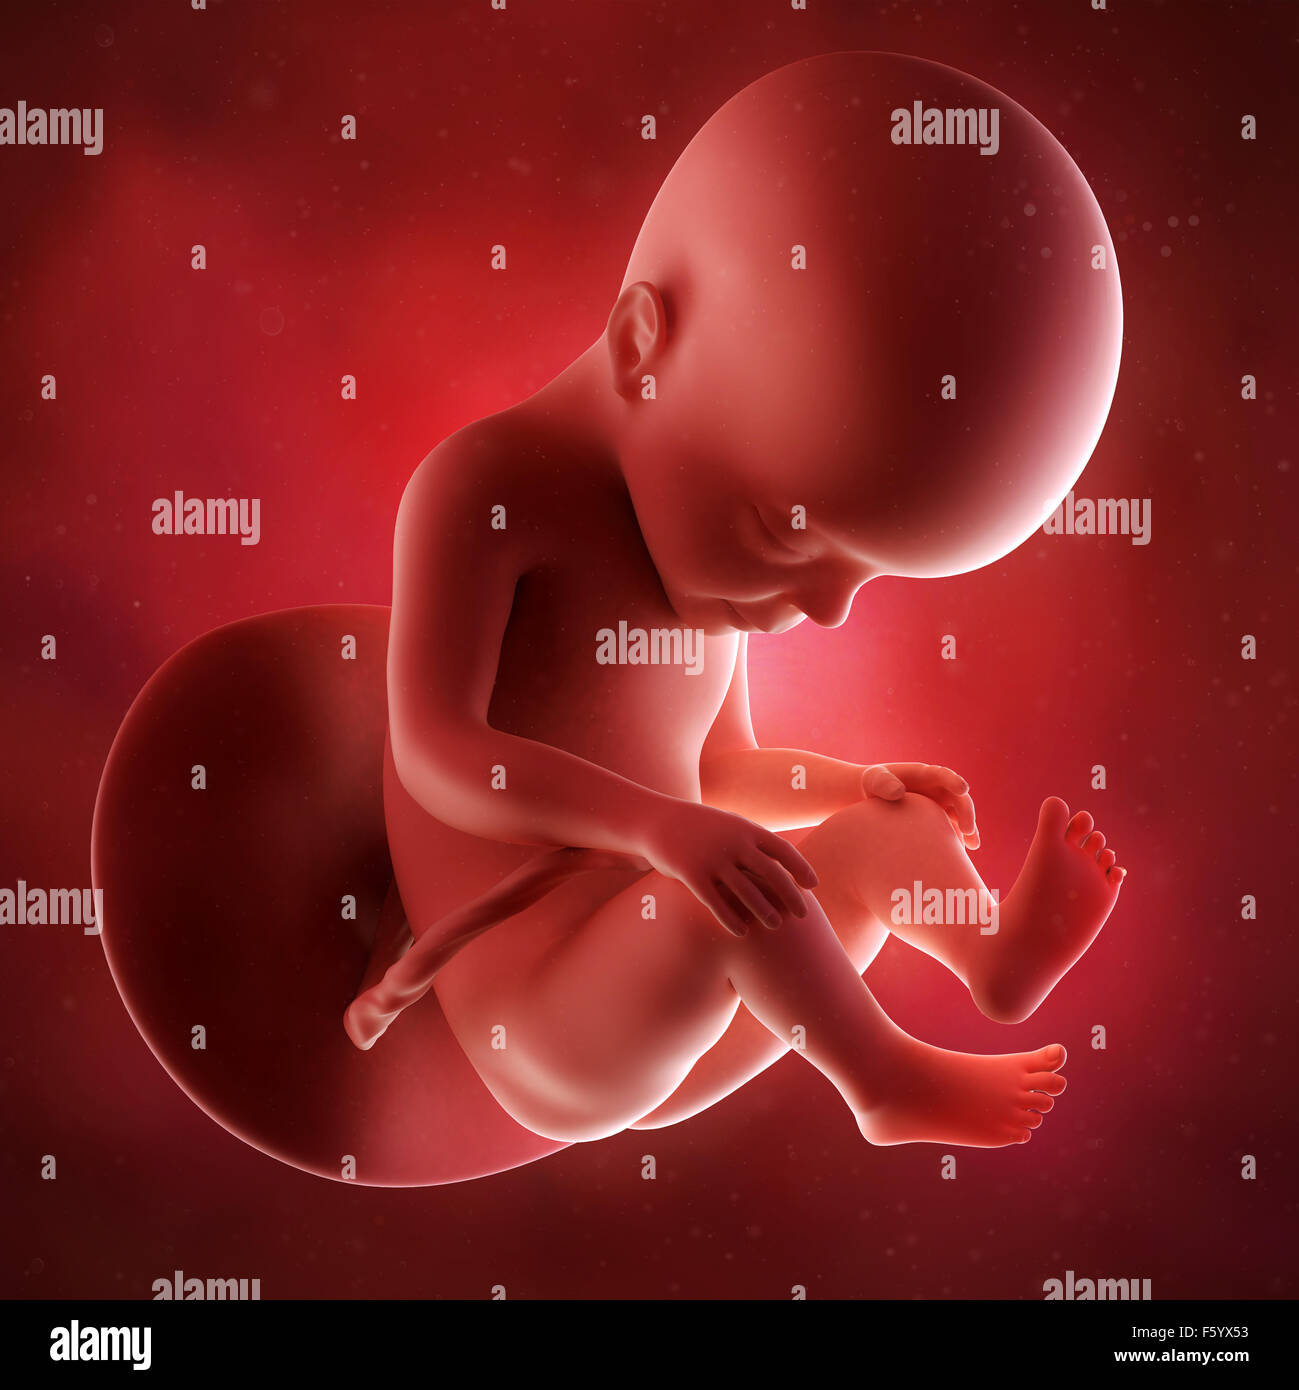 medical accurate 3d illustration of a fetus week 27 Stock Photo